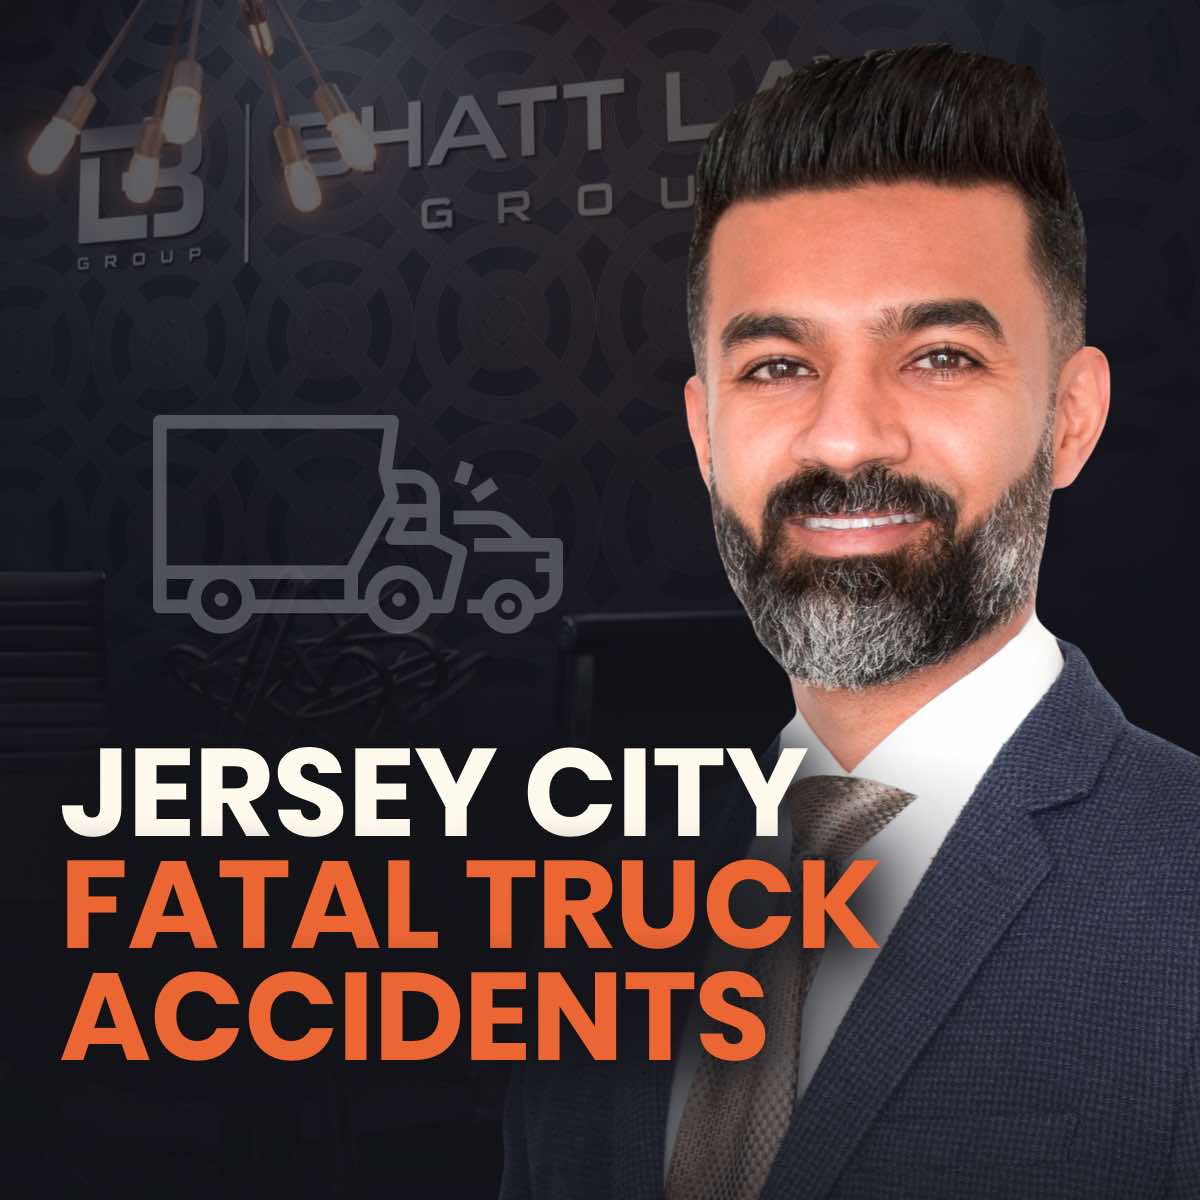 Jersey City Fatal Truck Accidents